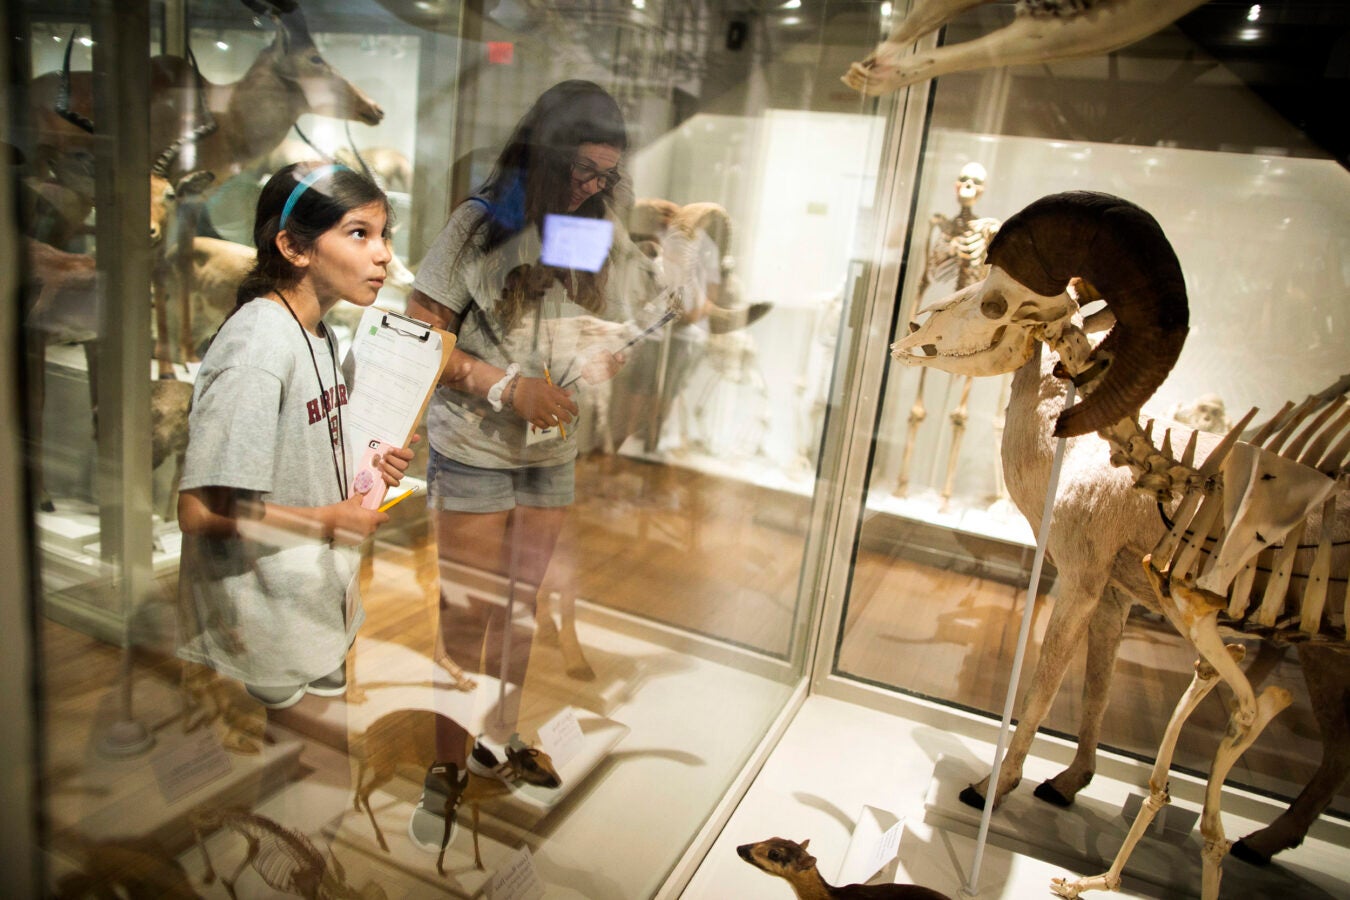 Addison Rich and Olivia Pappas explore some of the wonders at the Harvard Museum of Natural History.